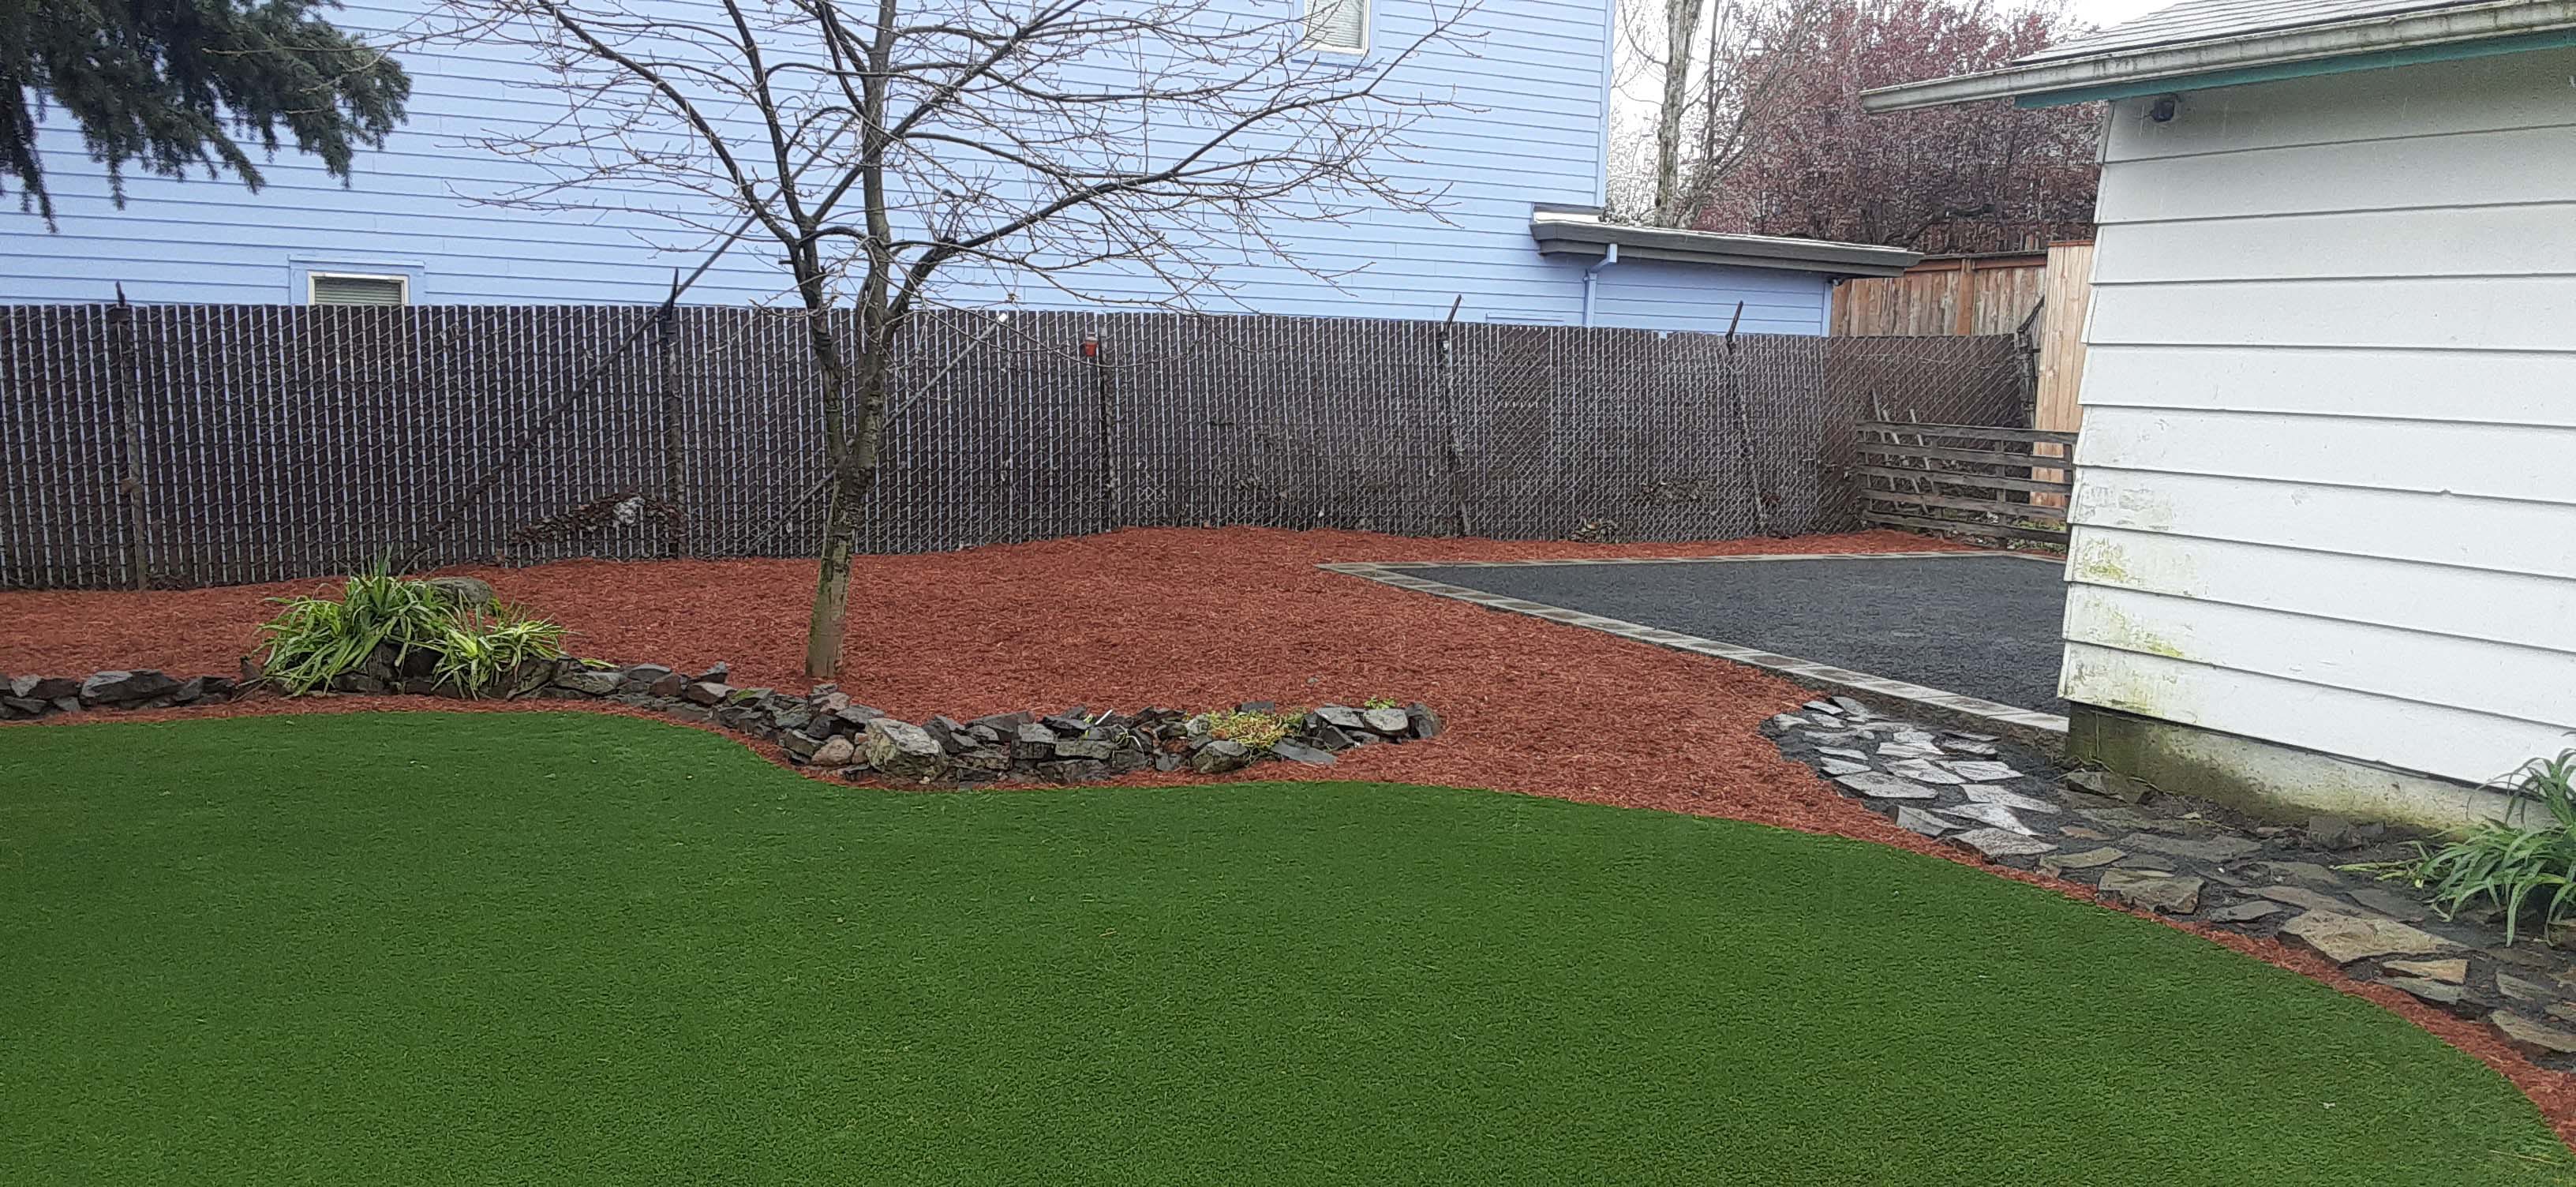 Cleaned out backyard area with new grass and mulched area, new trees and plants, and new patio section